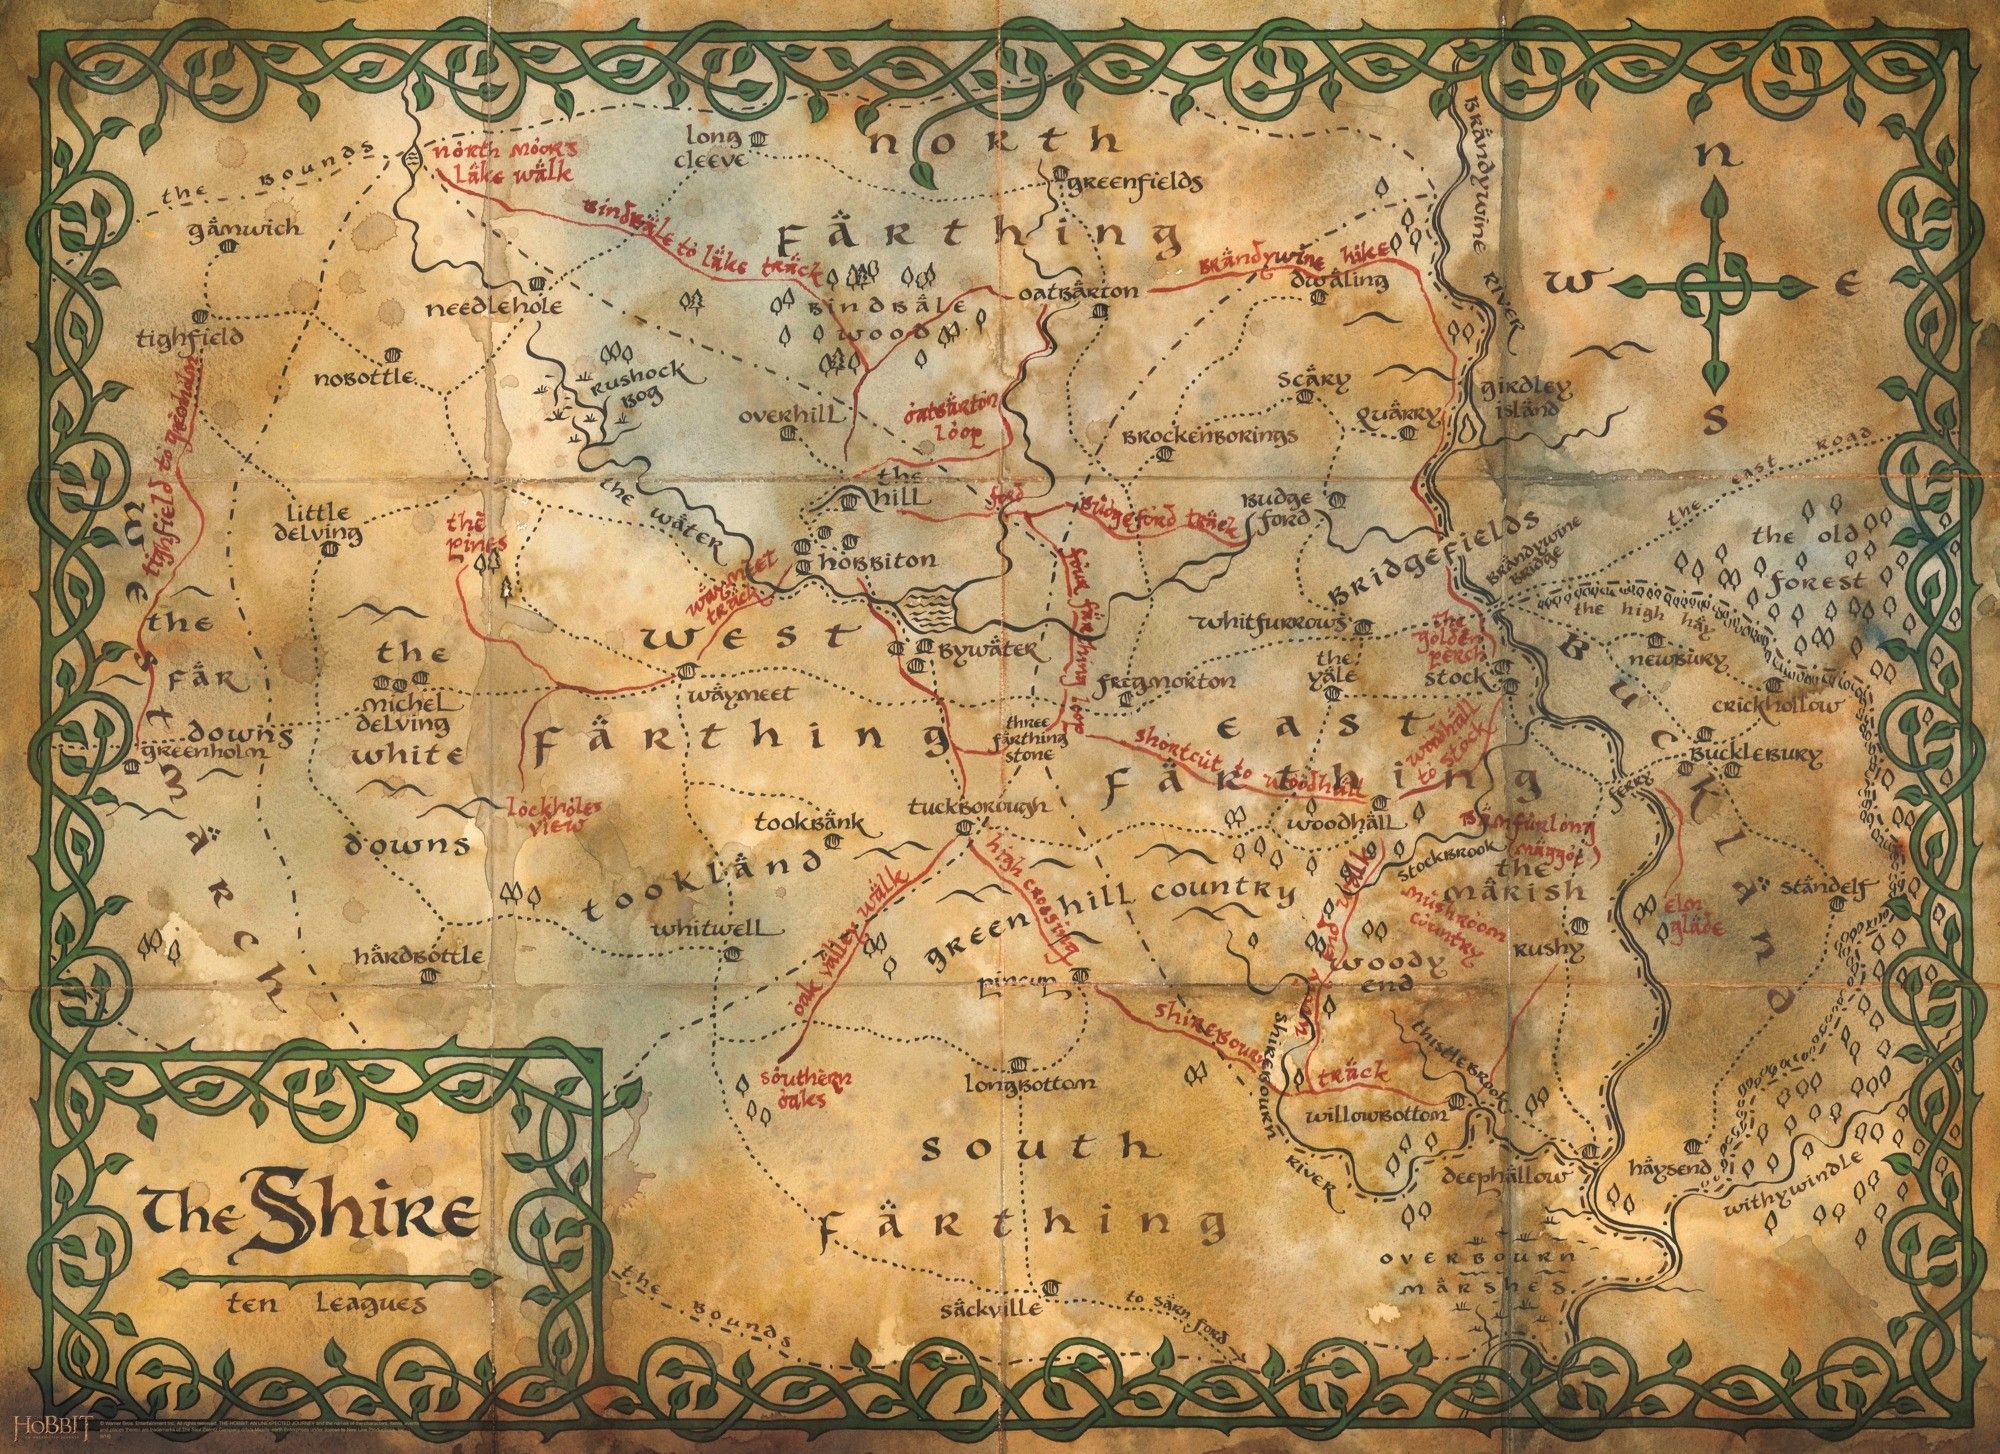 Hobbit Map Wallpaper Map Of The Shire, Middle Earth Of The Rings Shire Map HD Wallpaper